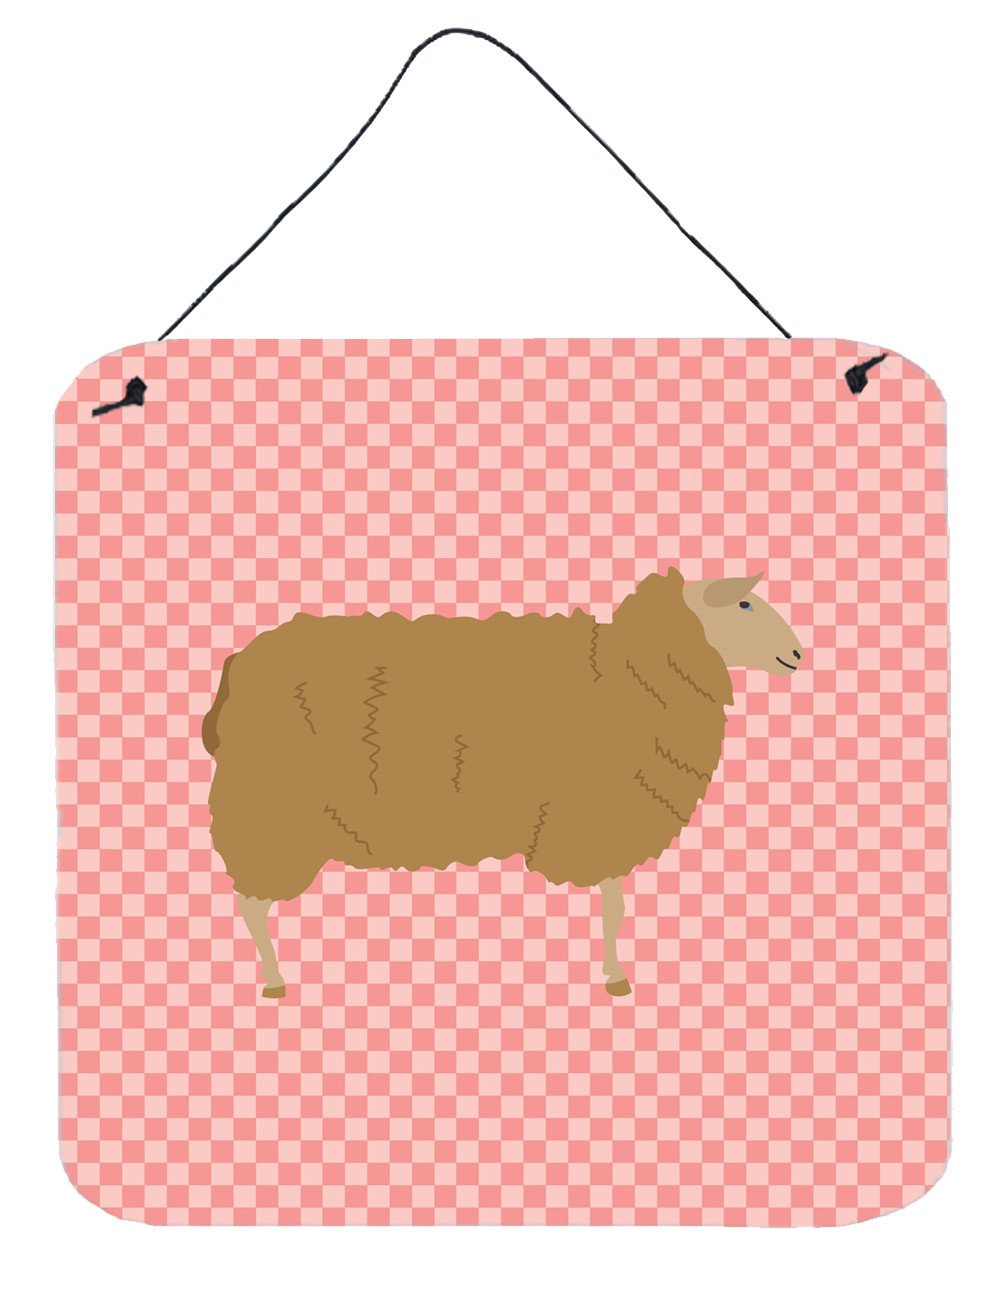 East Friesian Sheep Pink Check Wall or Door Hanging Prints BB7977DS66 by Caroline's Treasures